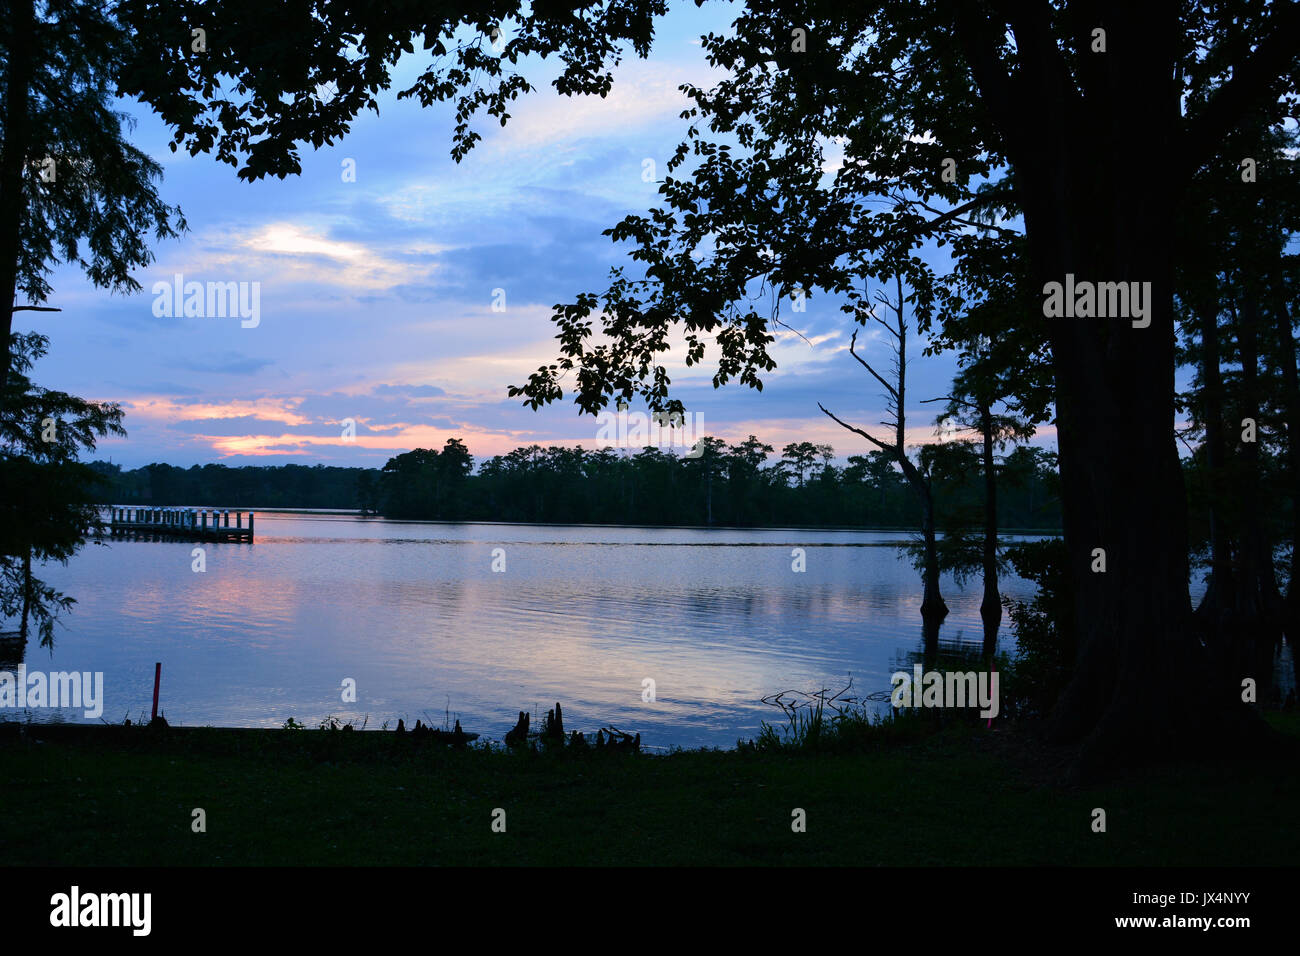 The Perquiman's River at sunset in the small town of Hertford North Carolina. Stock Photo